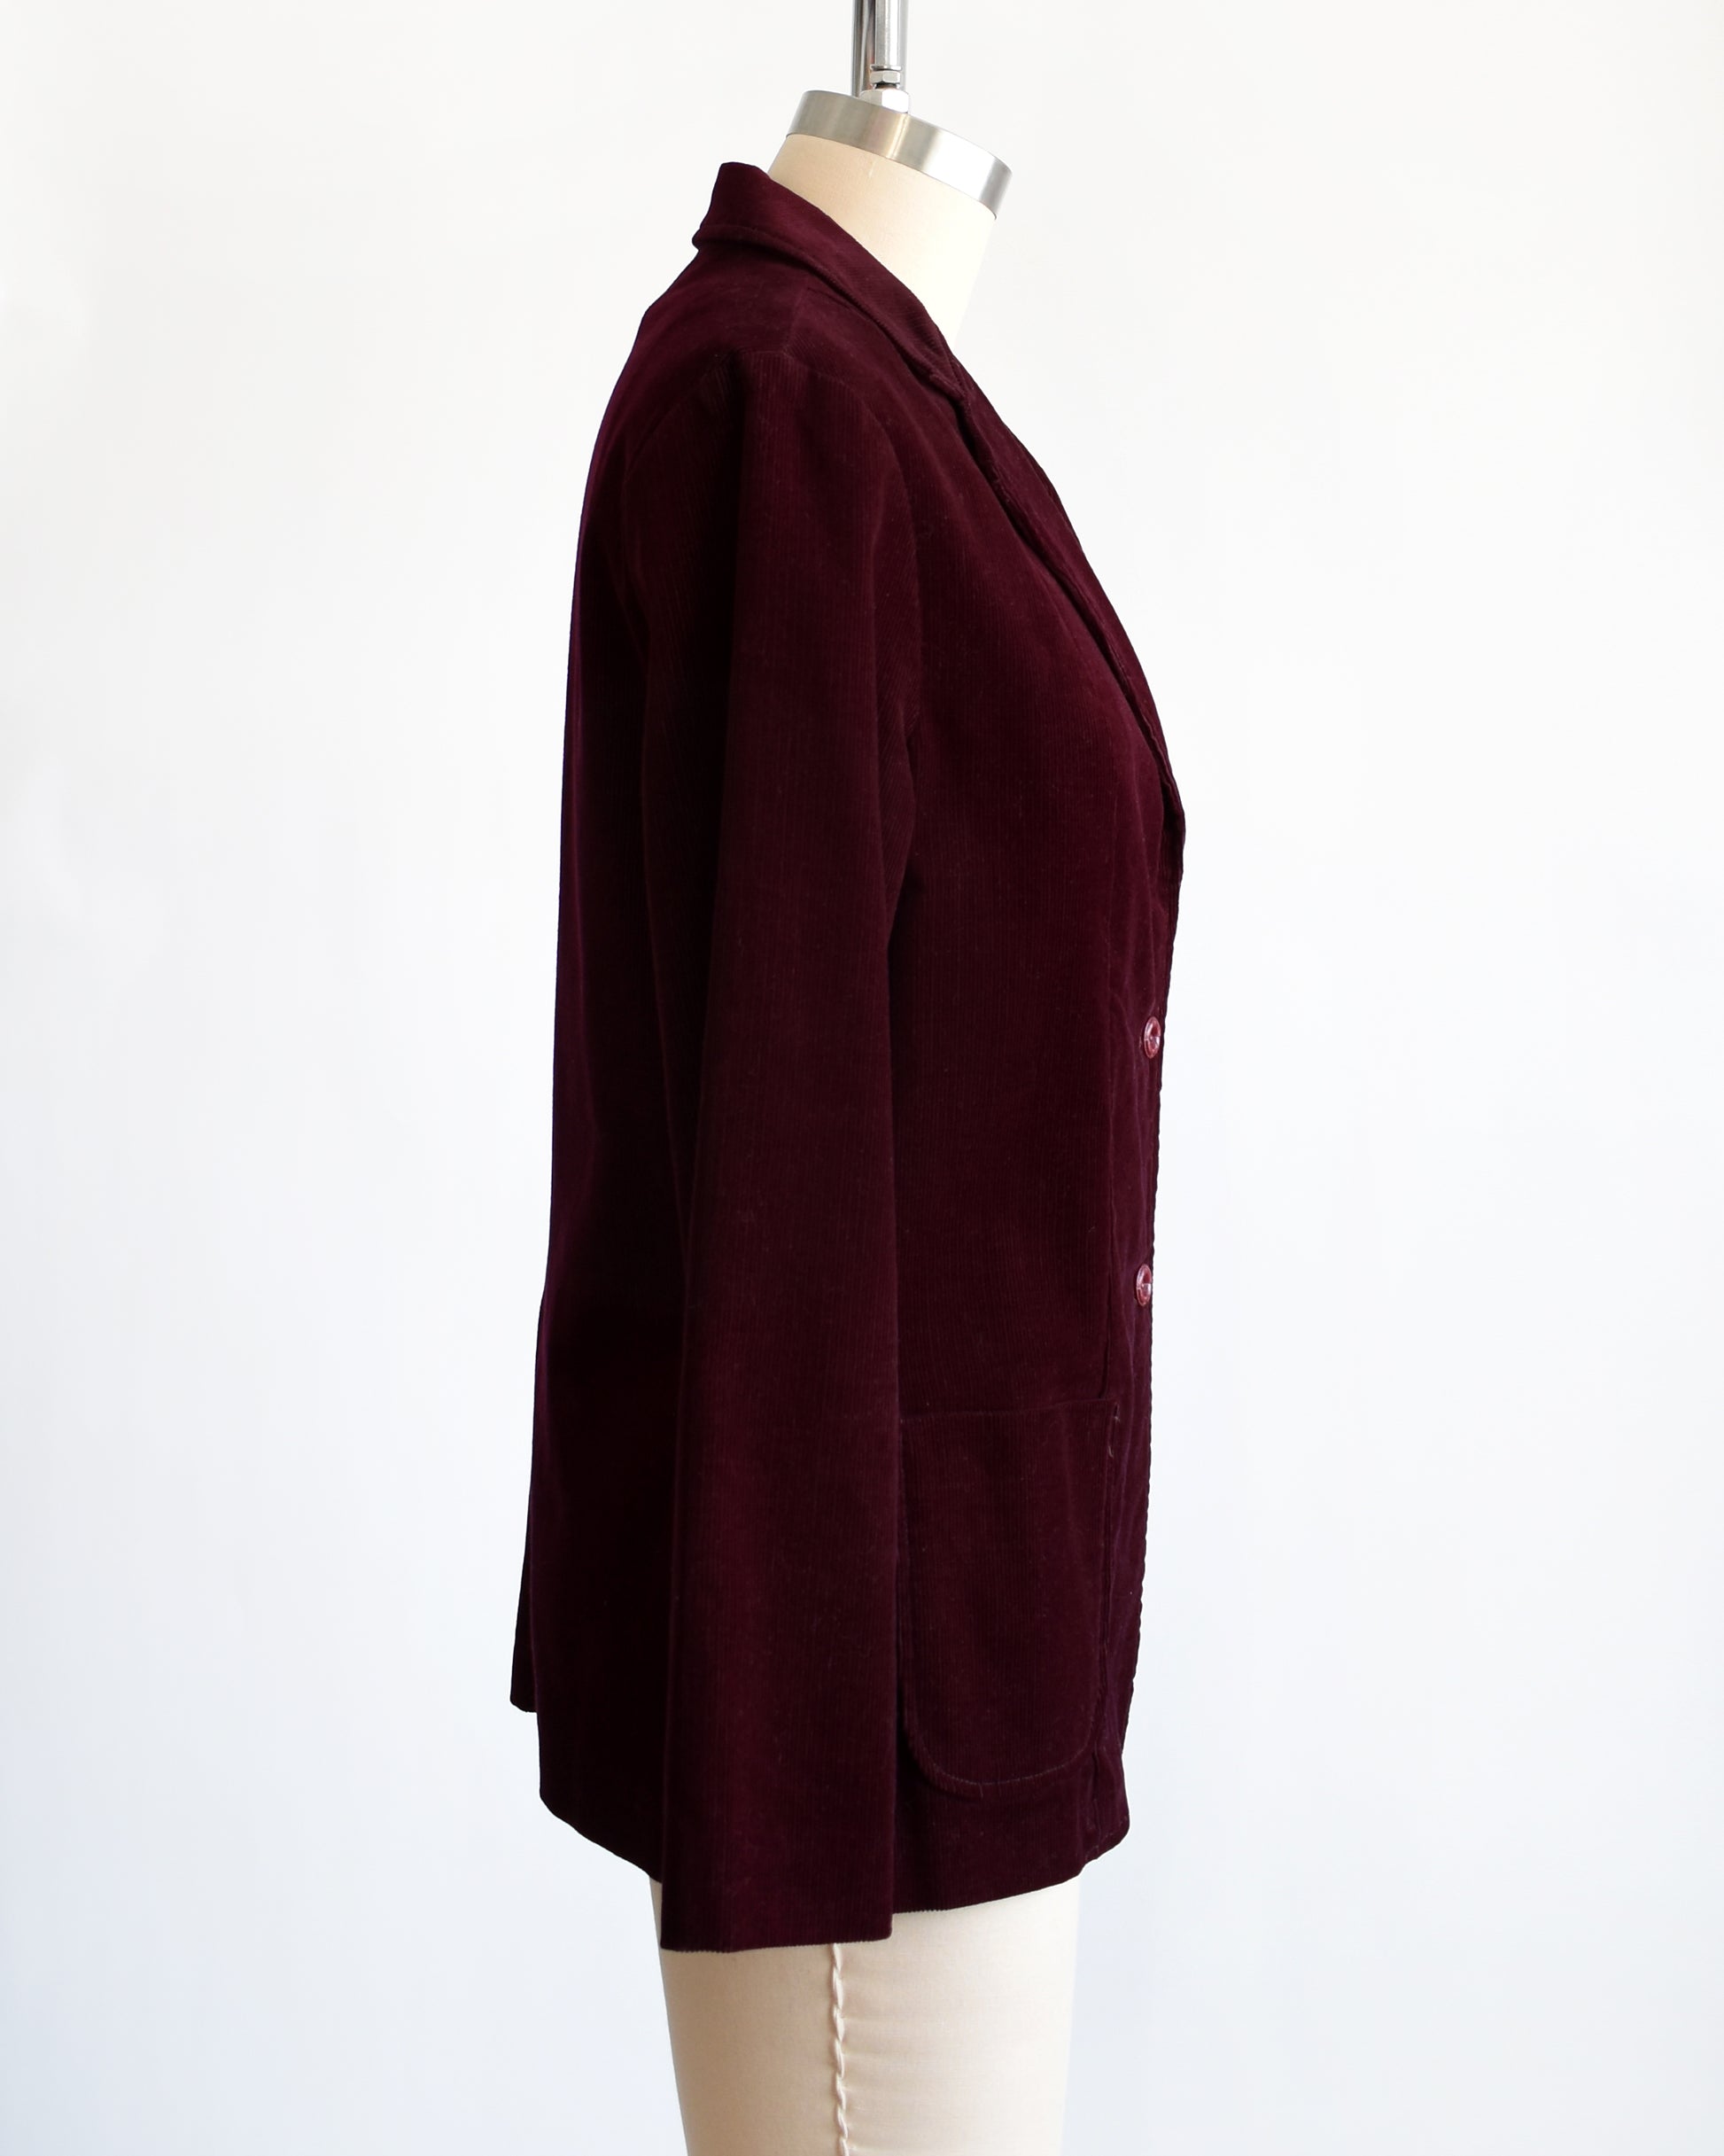 Side view of a vintage 1980s burgundy corduroy blazer features two plastic buttons on the front and two front patch pockets on each side.